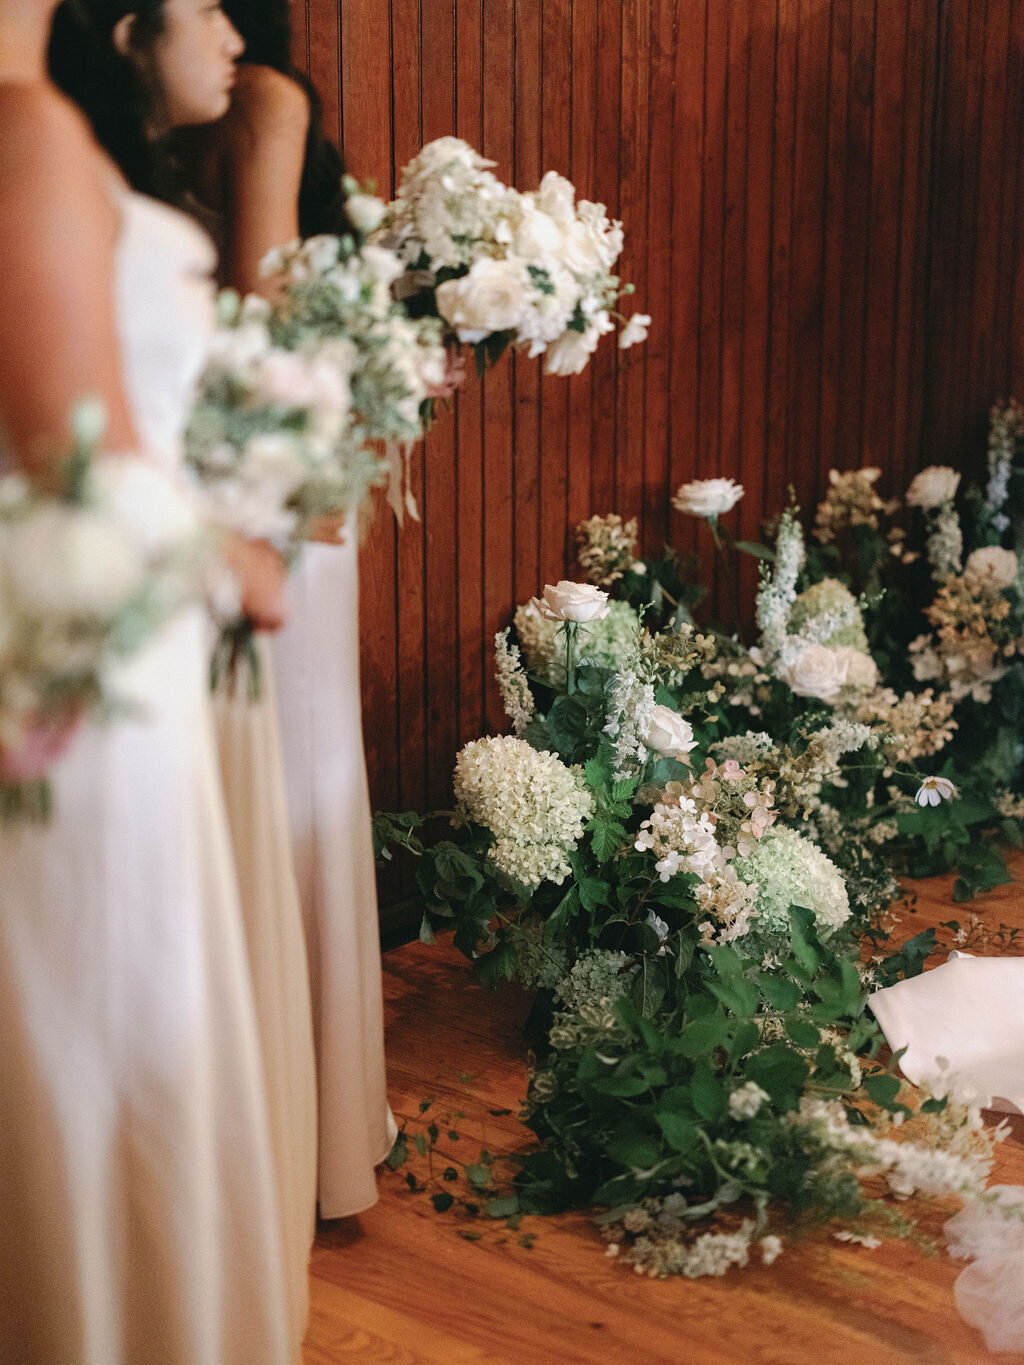 Rain plan Inside ceremony in Evergreen Museum carriage house with a lush white floral ground arch and bridesmaids in the foreground holding white bouquets.